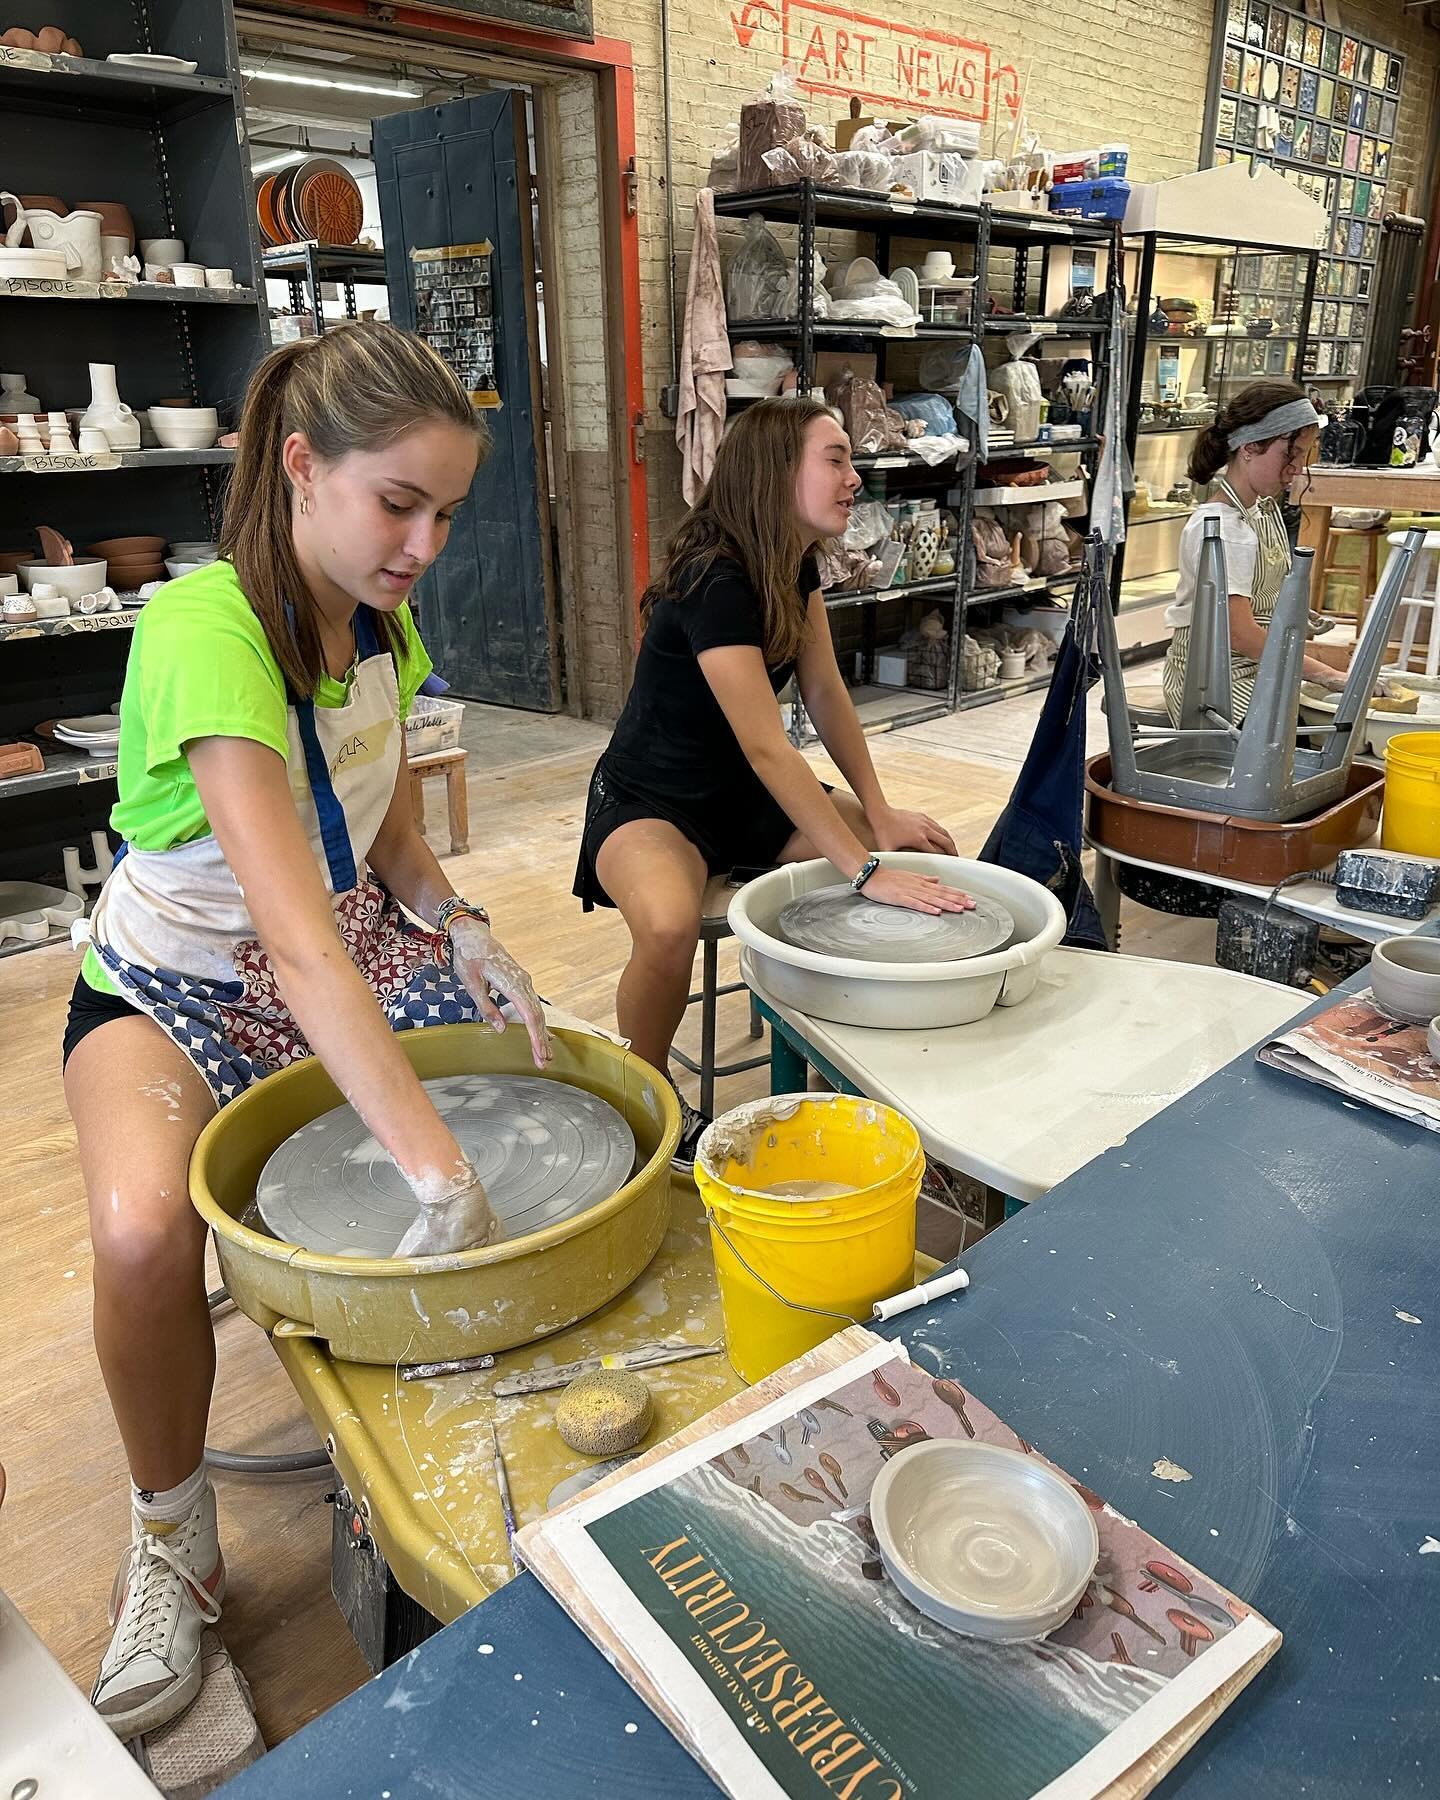 @theclayschool in Lynn MA
Coming up:
Kids Wheel Class $285
Sunday 2-3:30pm (6 week)
May 5-June 9
Instructor: Andi MacKay
Kids 11-15 yrs old
Everything included
​Max 6 kids (4 spots left)

Sign up on our website www.theClaySchool.com

#wheelpottery #t